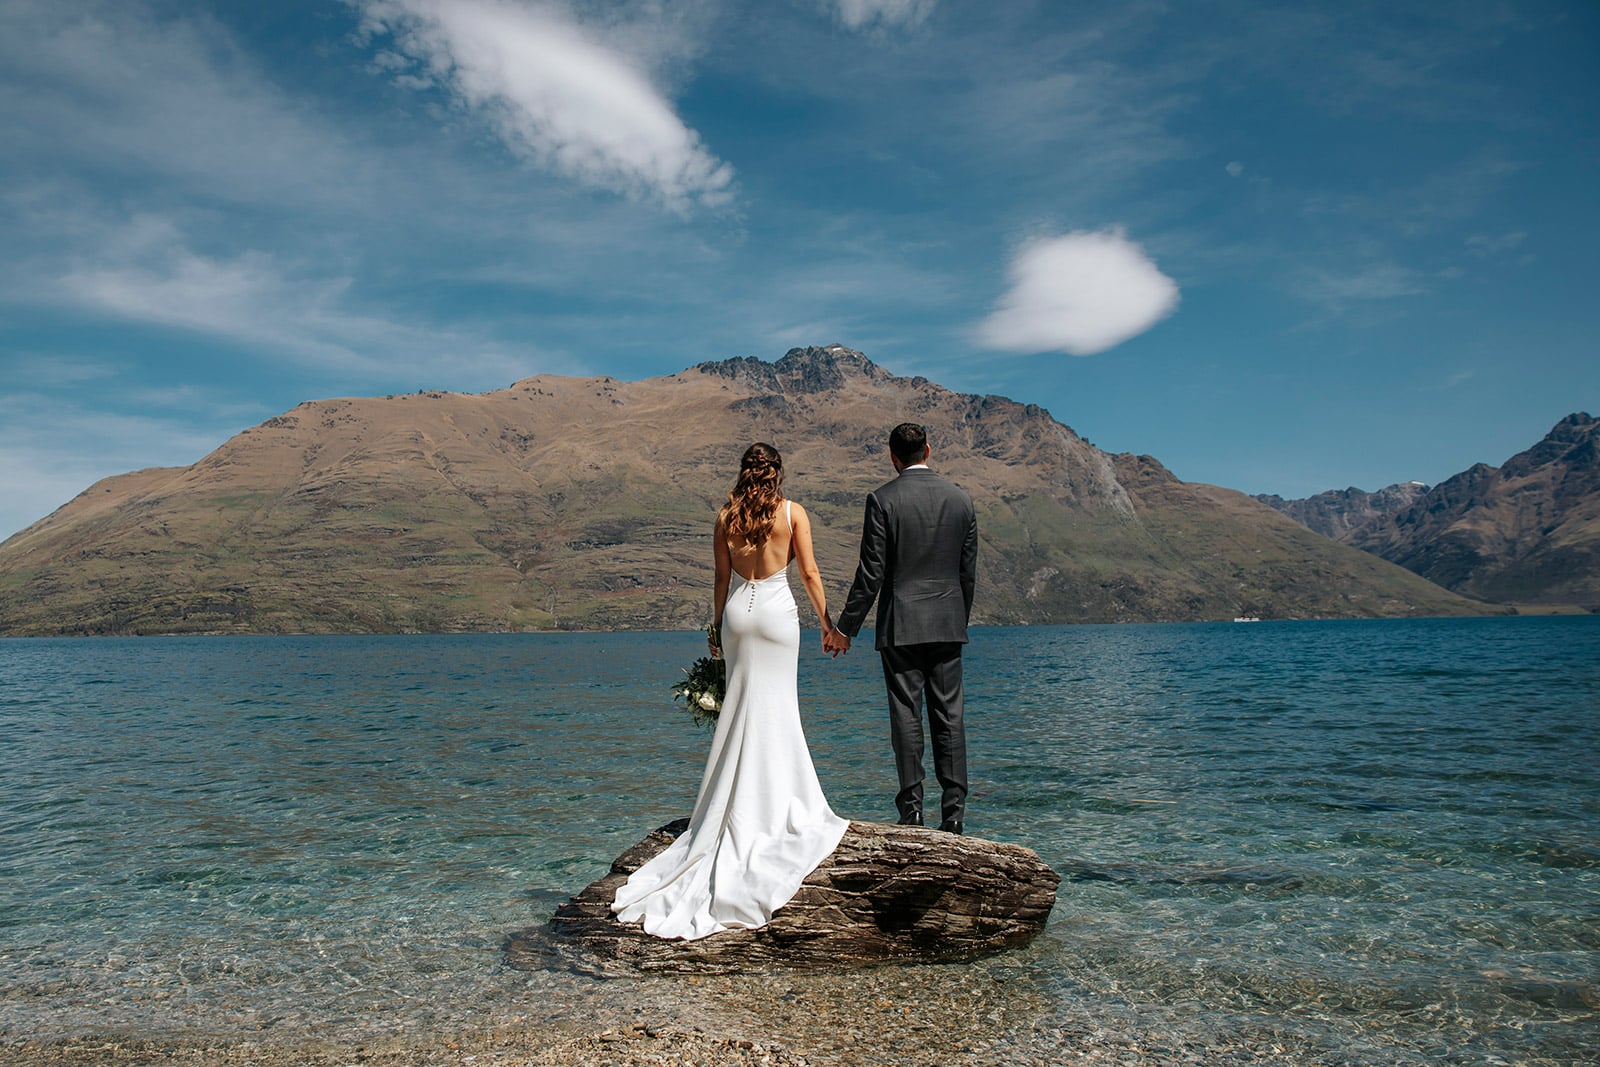 Wedding on The Ledge in Queenstown